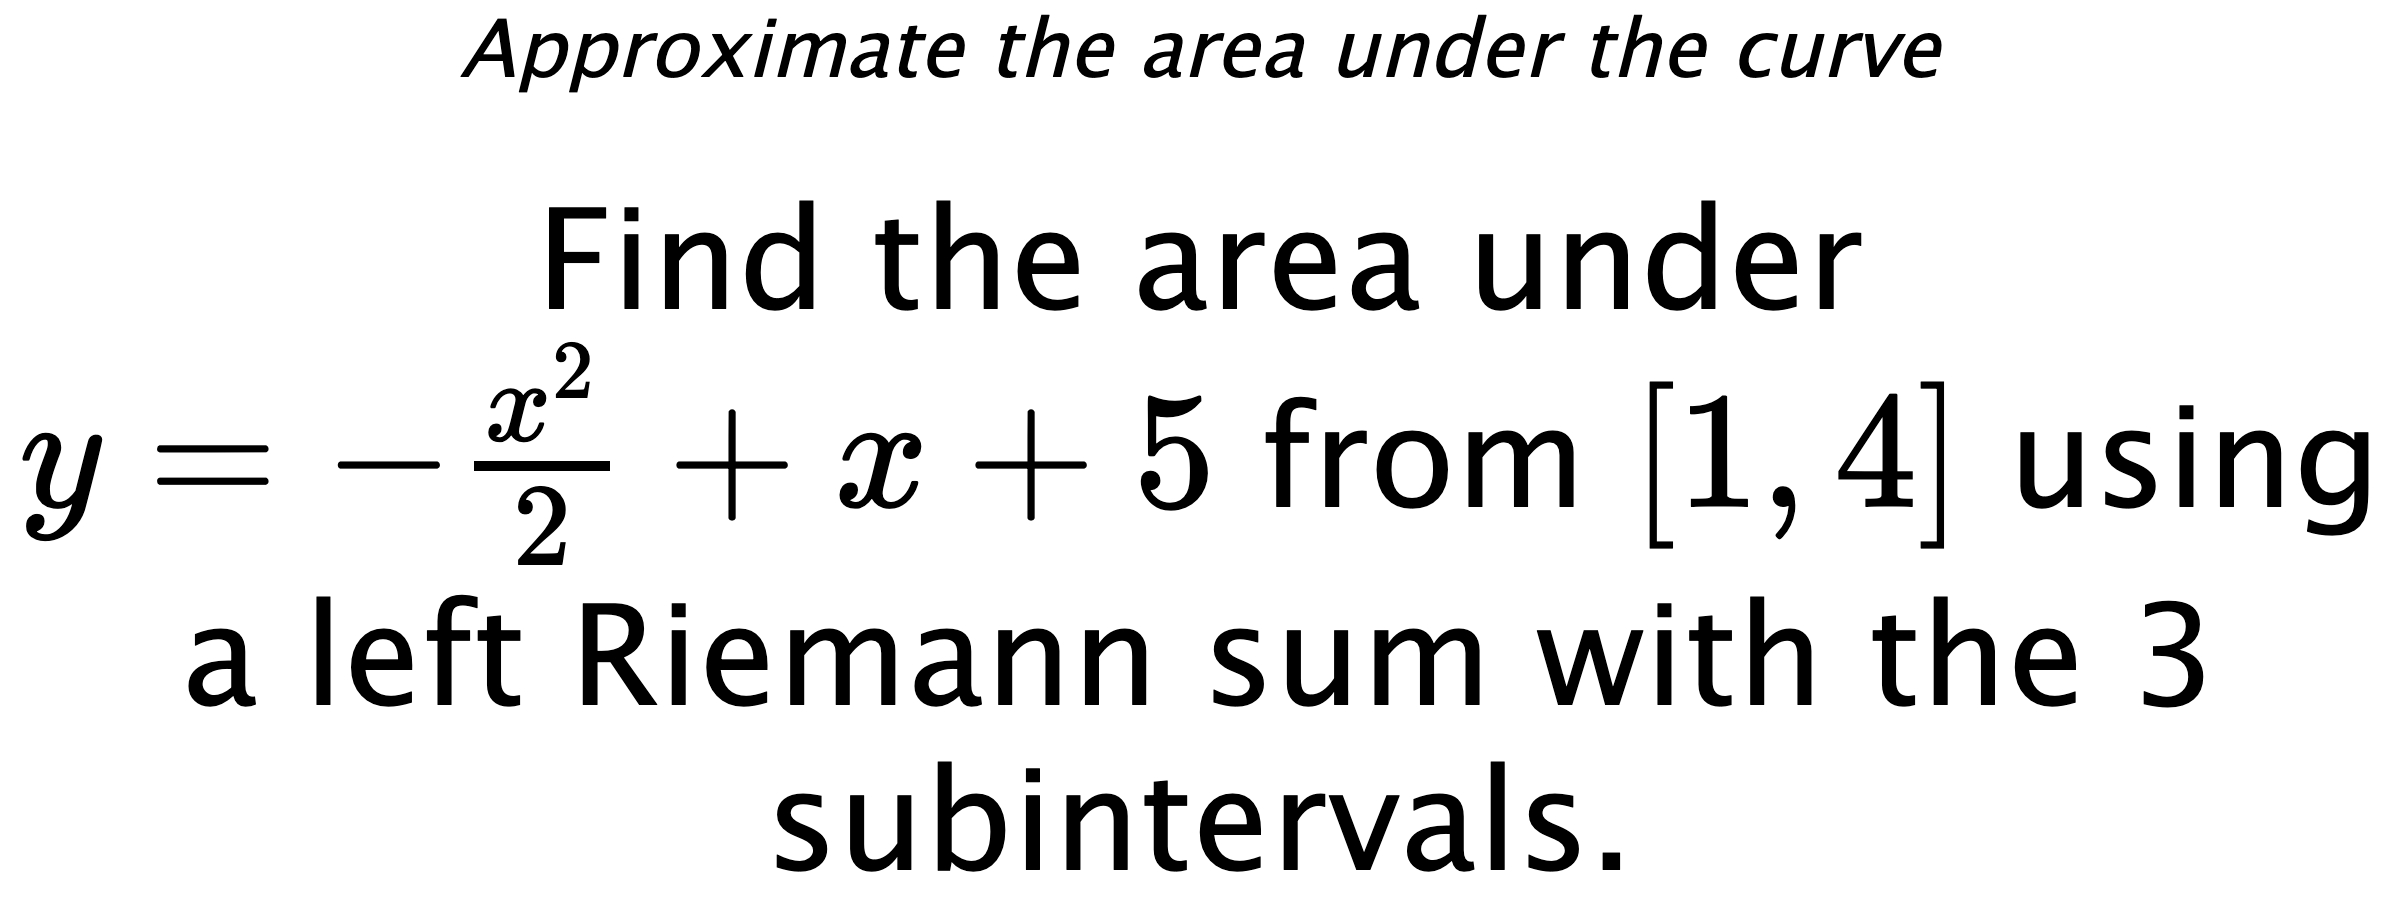 Approximate the area under the curve Find the area under $ y=-\frac{x^2}{2}+x+5 $ from $ [1,4] $ using a left Riemann sum with the 3 subintervals.